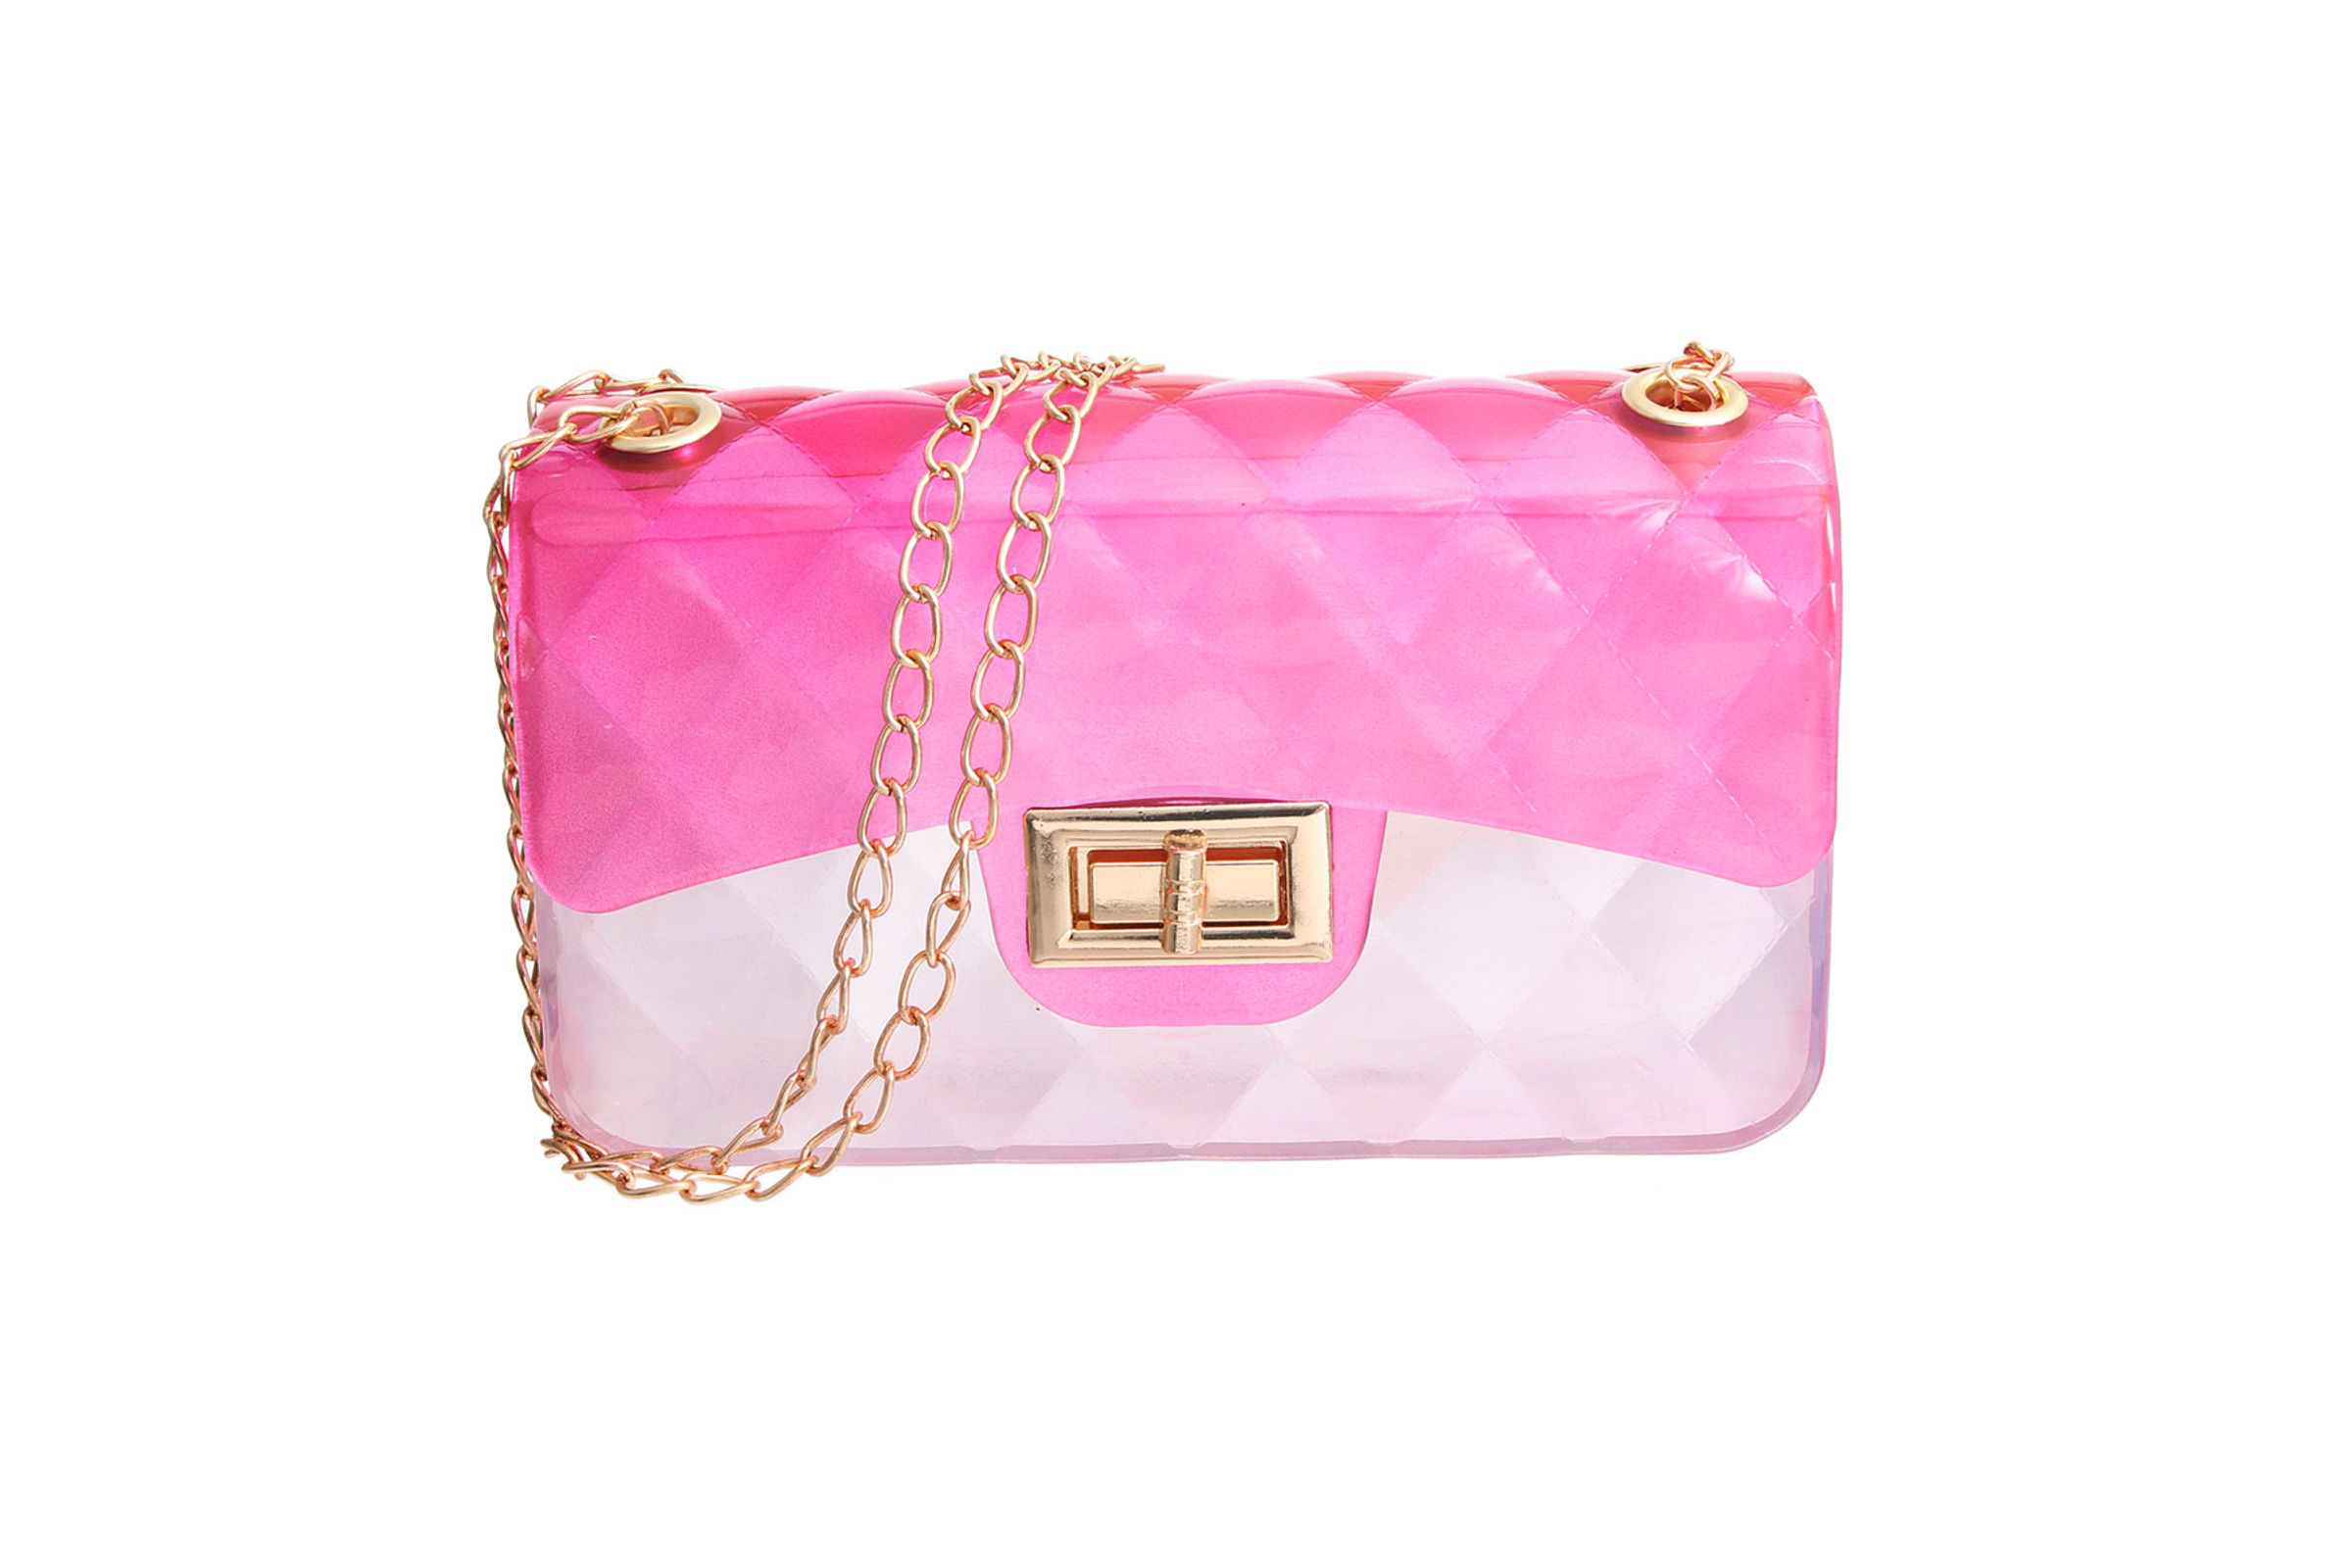 Quilted Detail Chain Shoulder Tote Bag Neon Pink pink